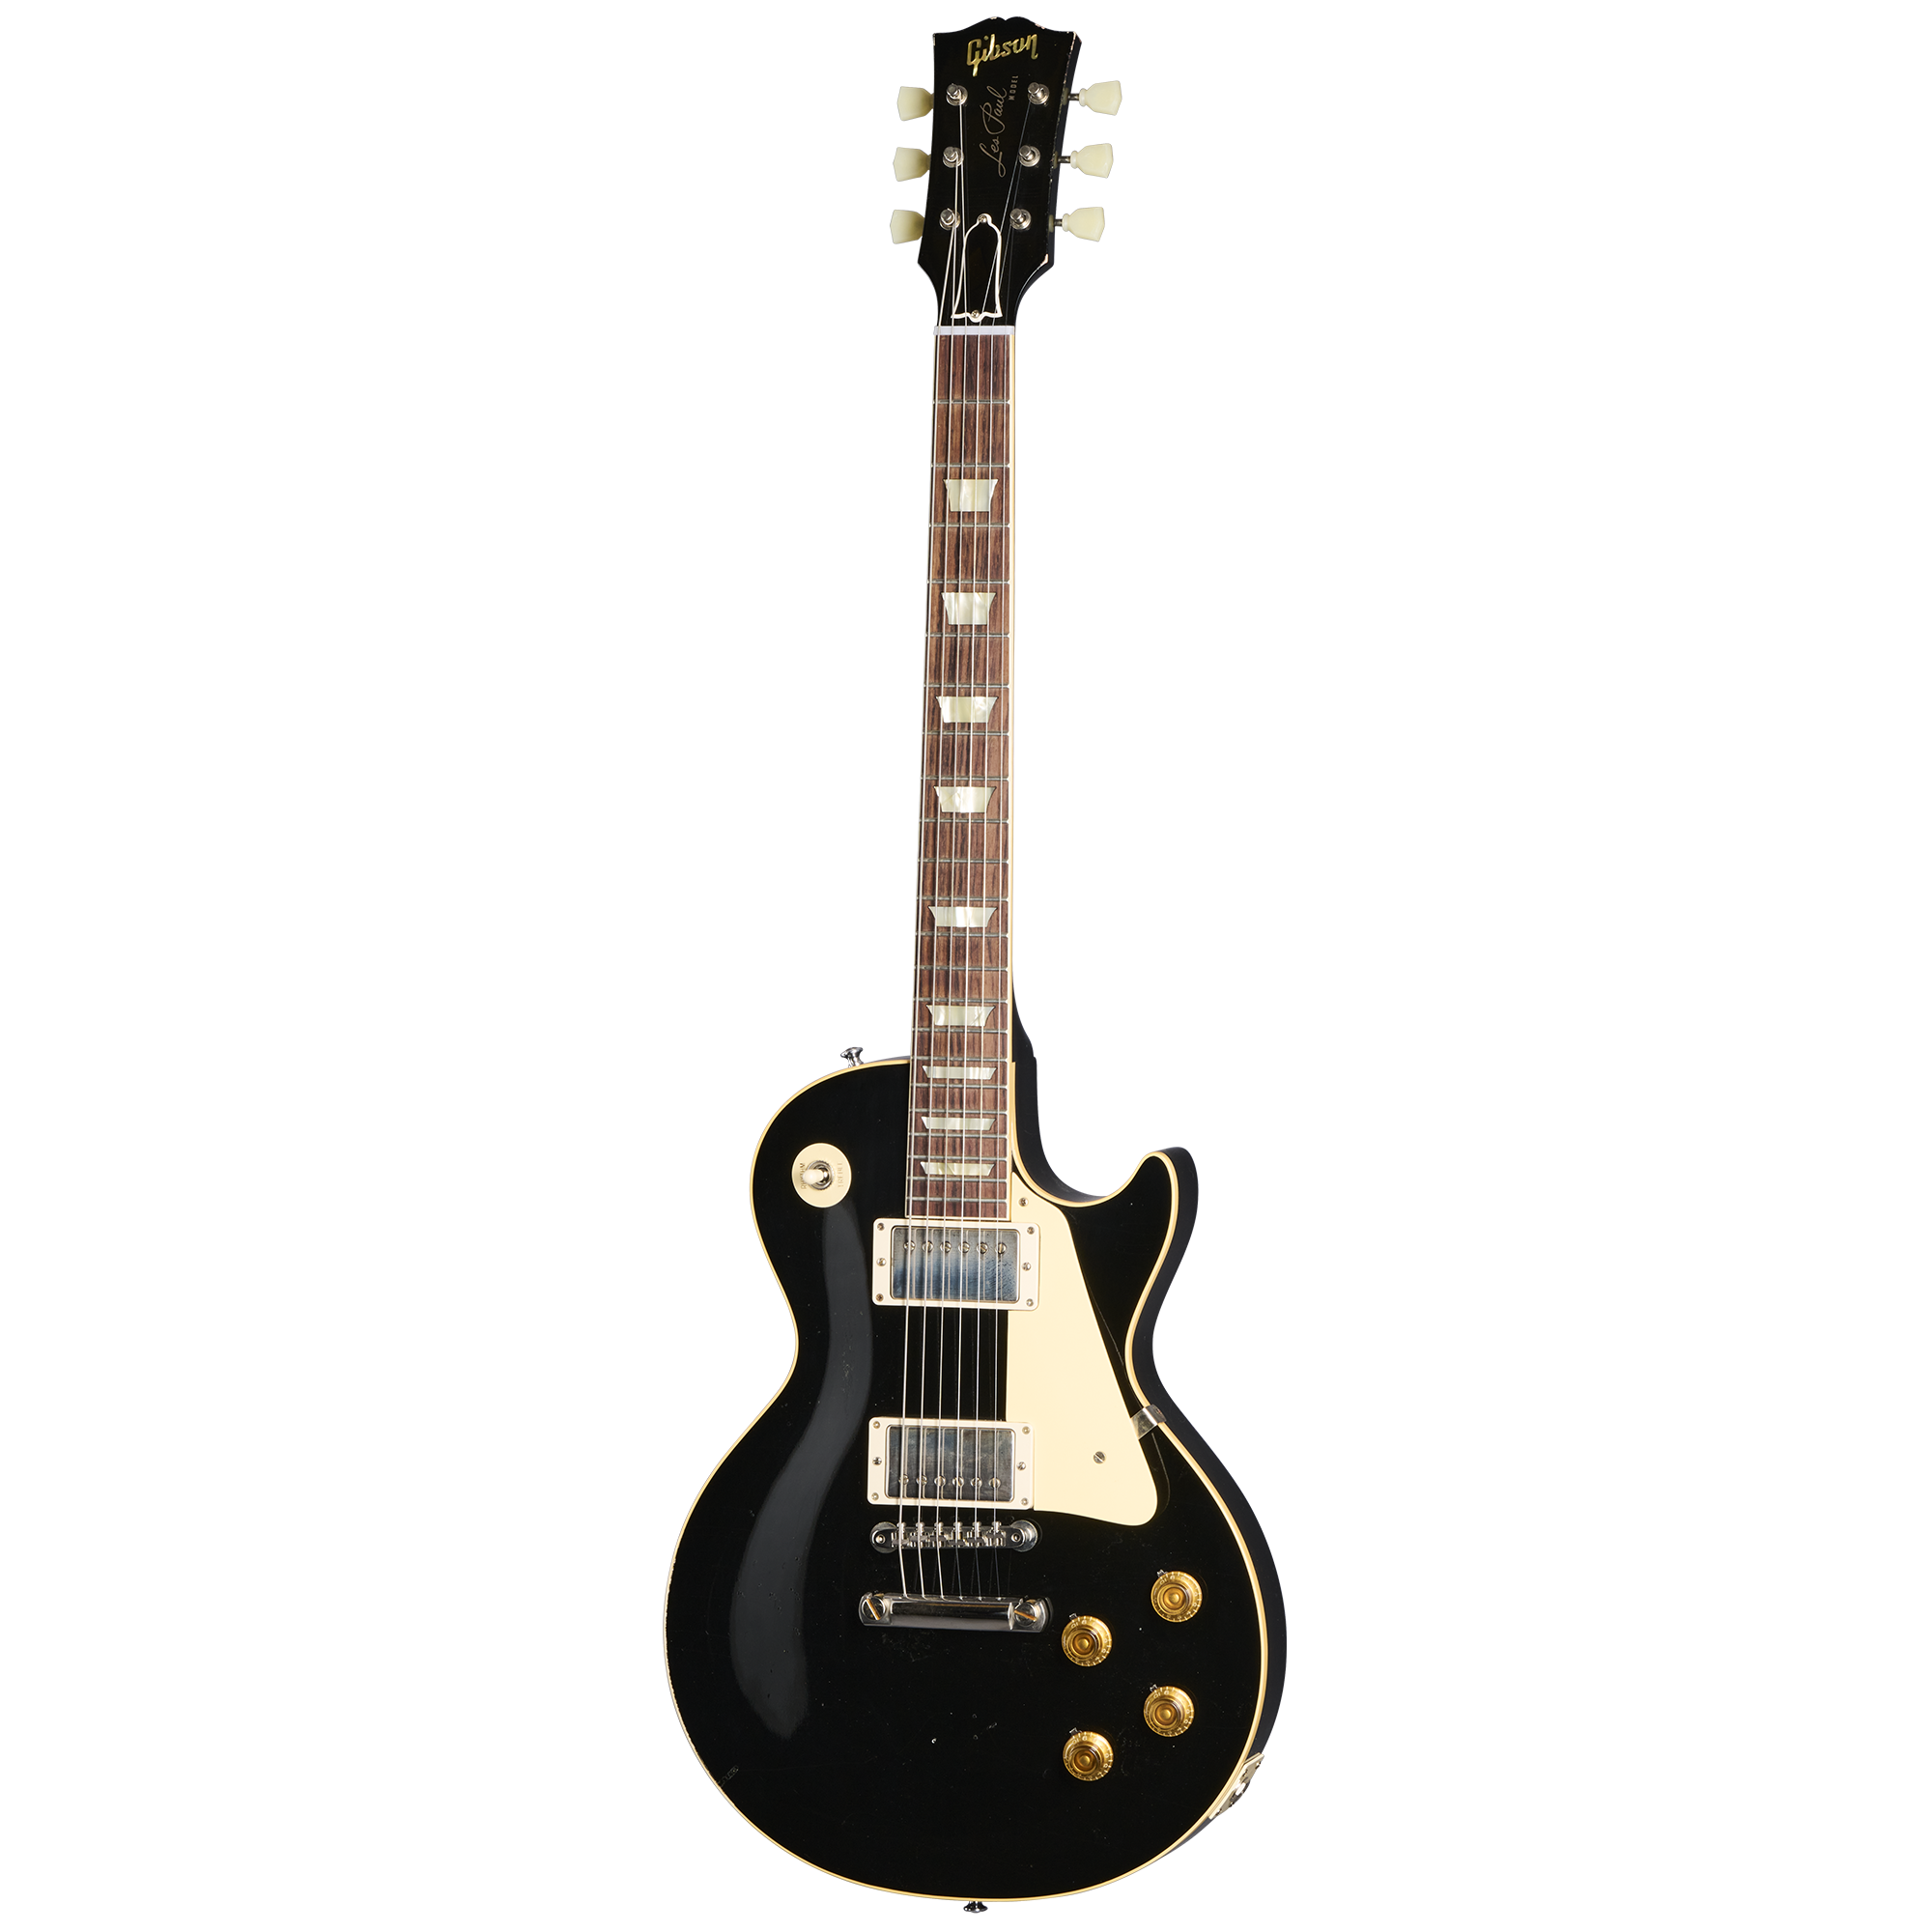 1957 Les Paul Standard Reissue Light Aged One of One | Gibson